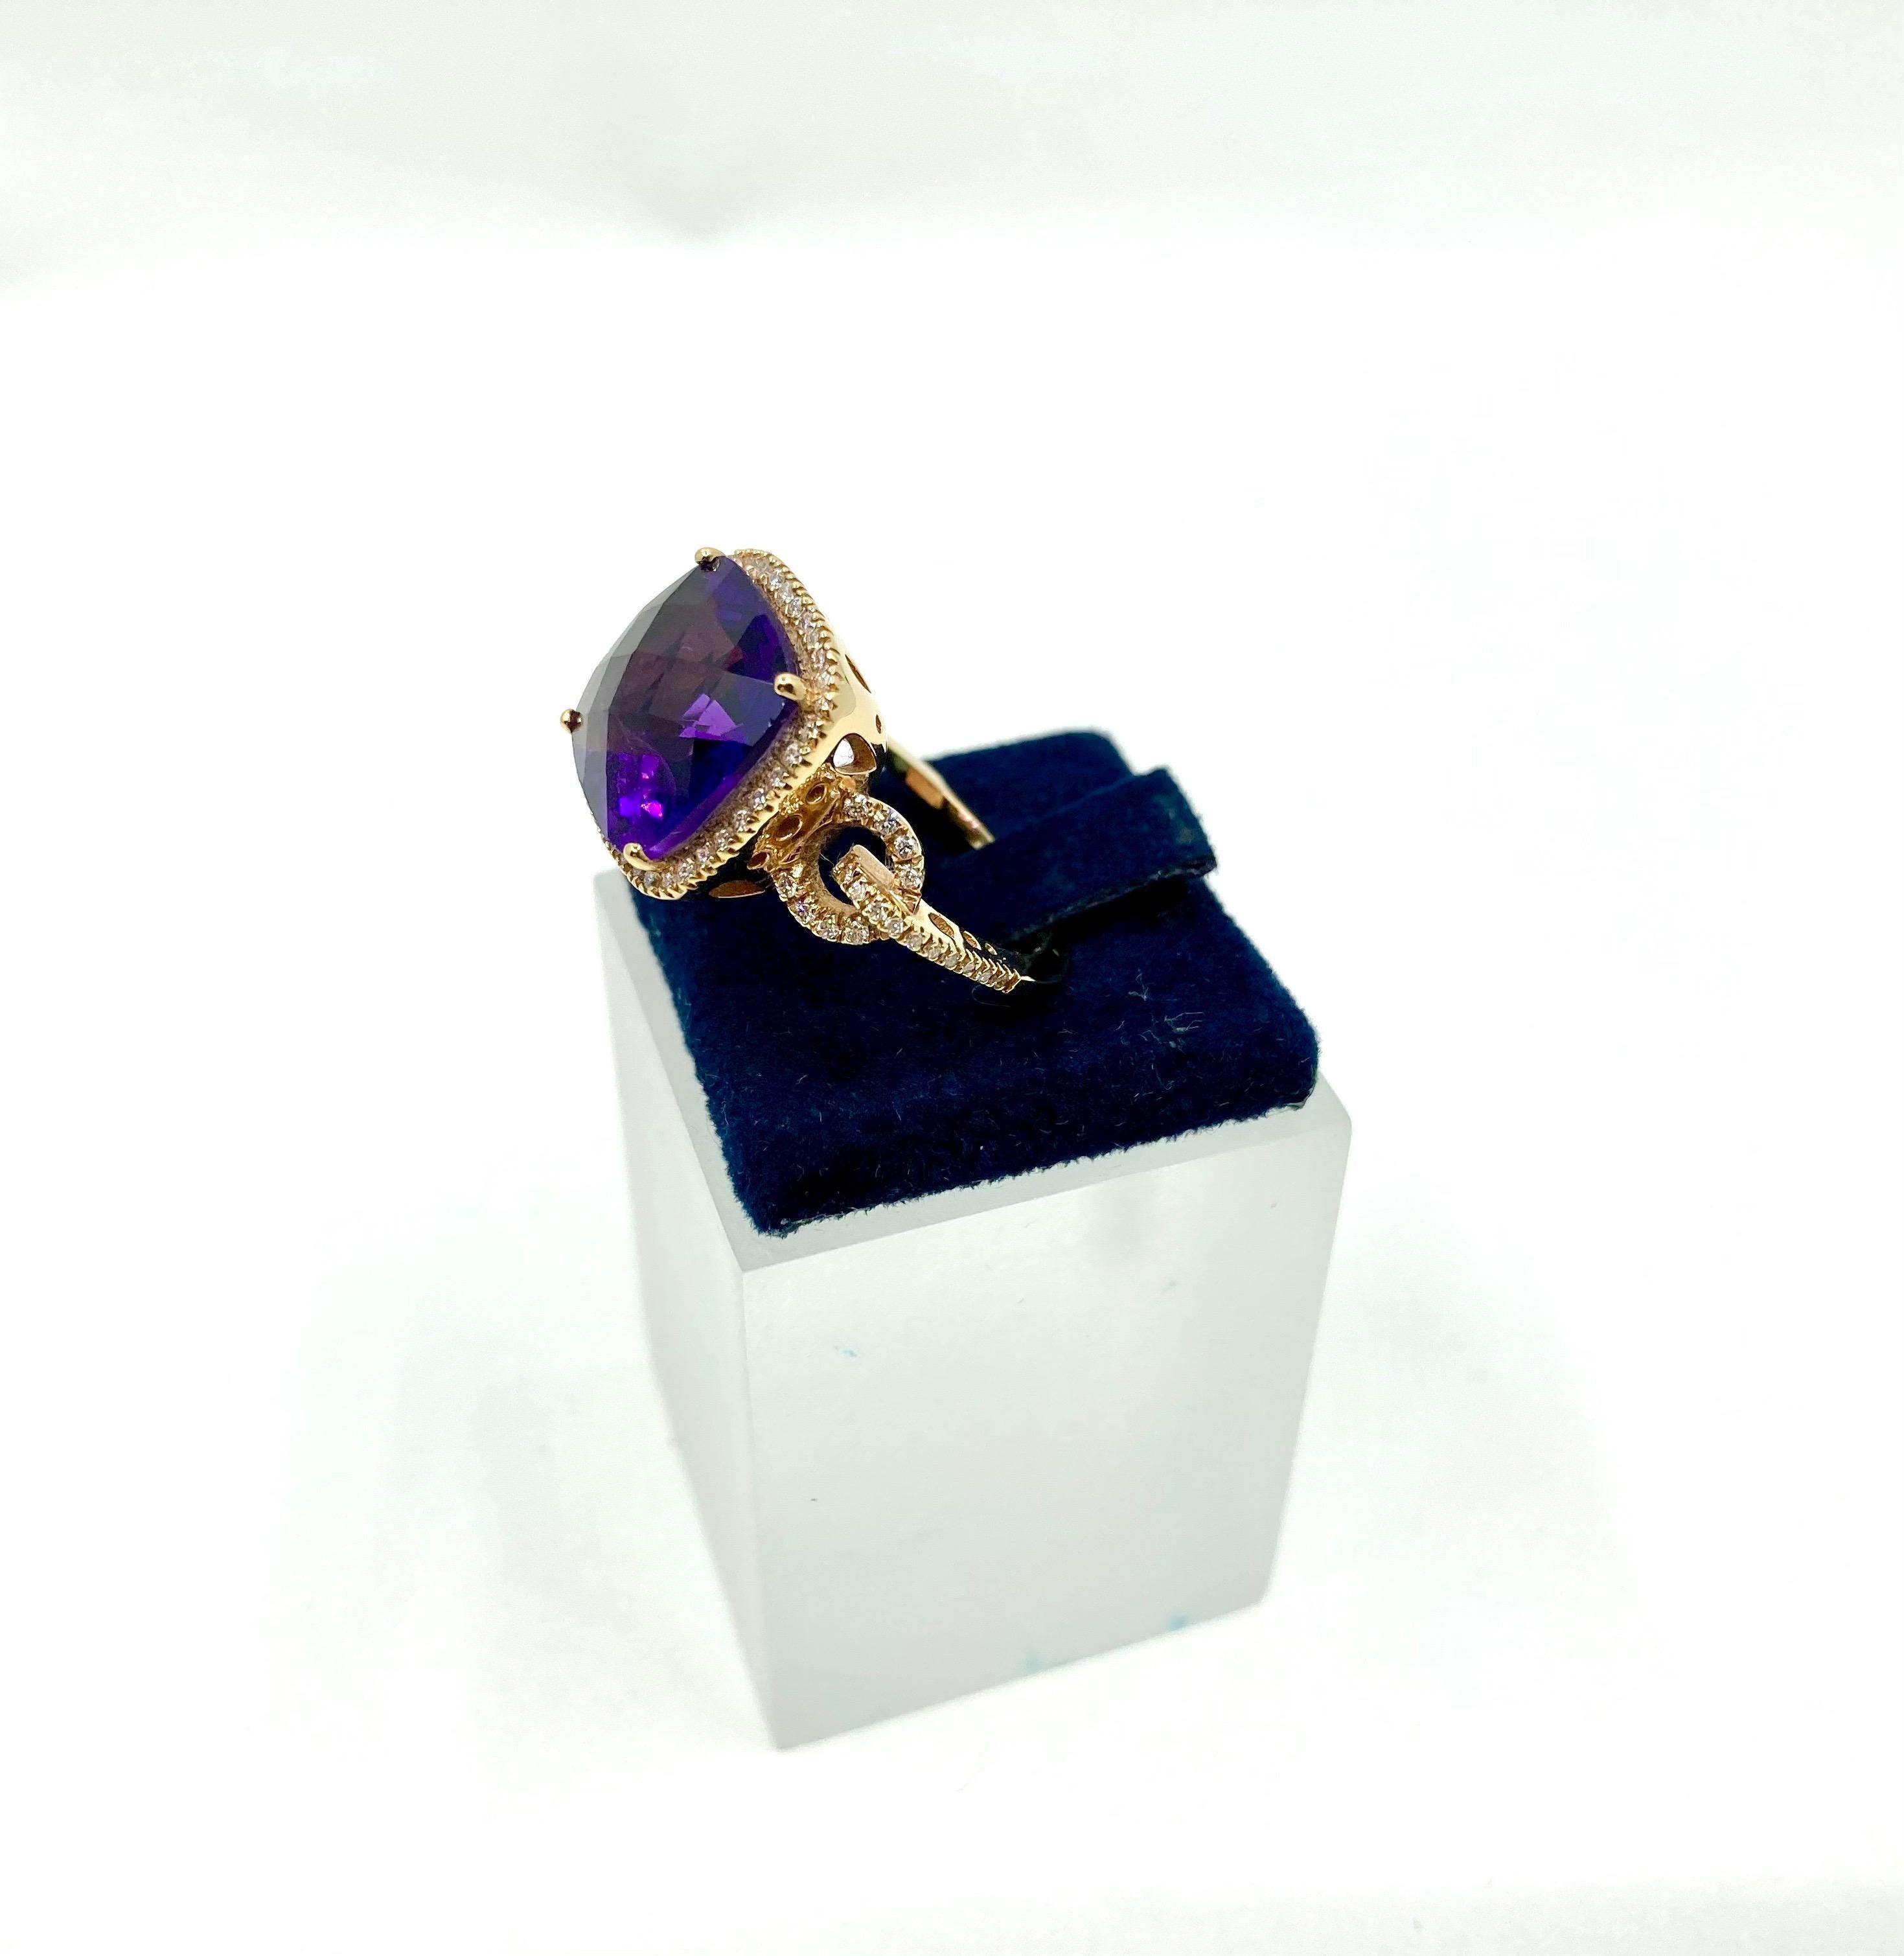 Timeless and elengat Yellow Gold ring, with a central Amethyst ct. 5.75 and Diamonds ct. 0.28, Made in Italy by Roberto Casarin. 

Size: 13,5 (6,5 USA)

A simple yet timeless design, the central beautiful Amethyst along with the surrounding diamonds